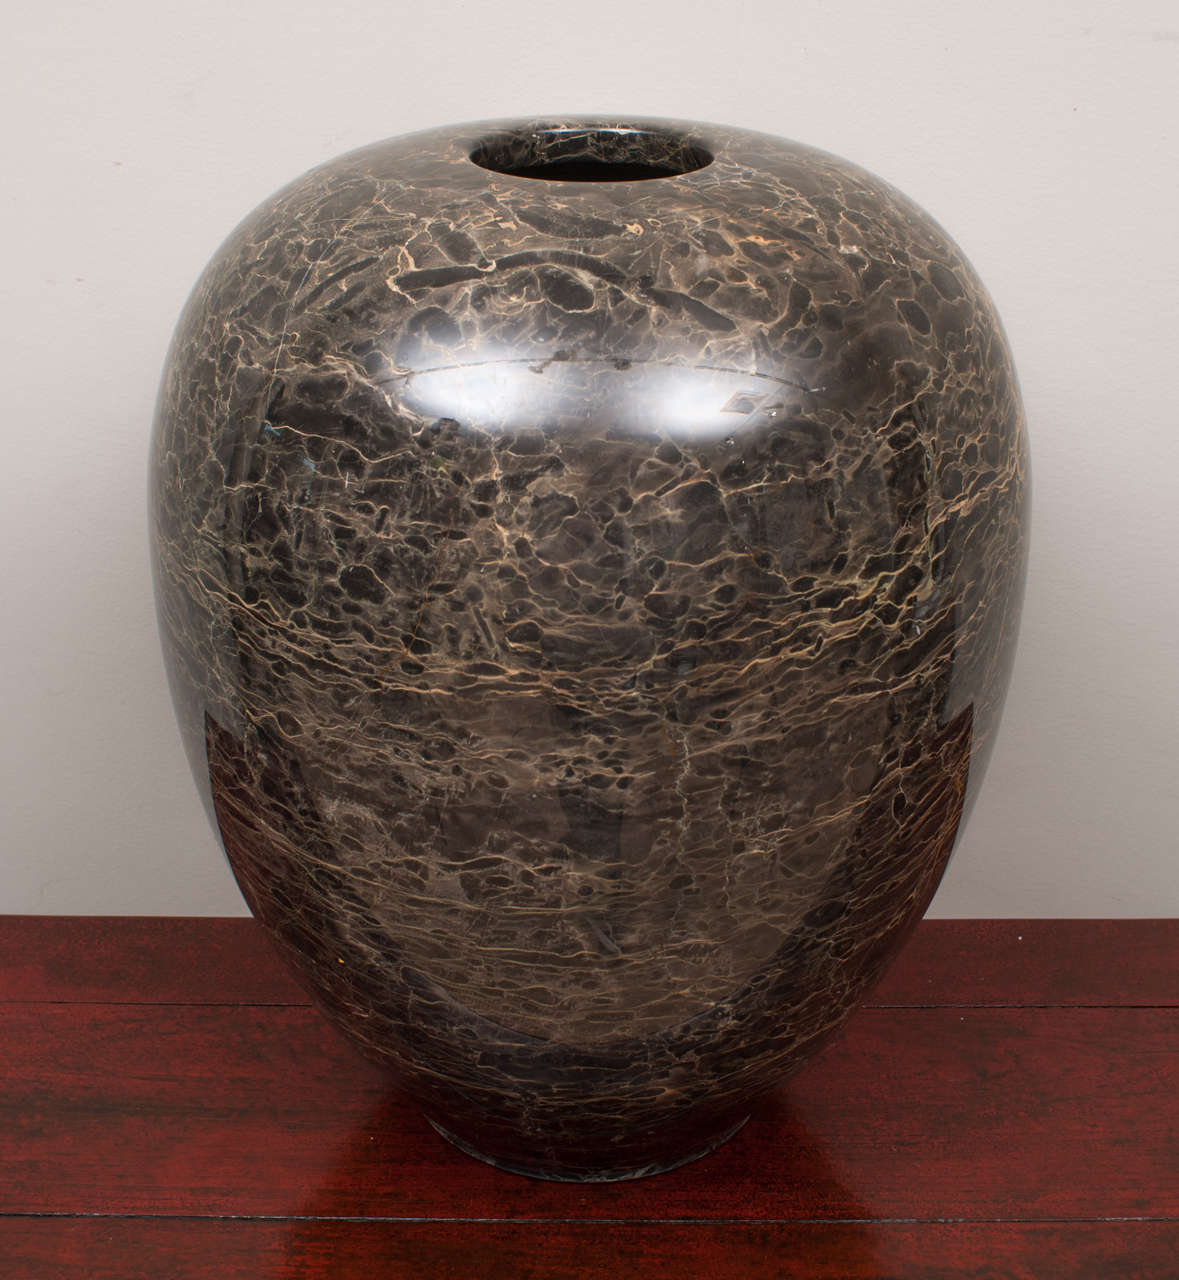 This extraordinary marble was quarried from the towering Cangshan Mountain Range which surrounds the ancient city of Dali in the Yunnan Province of China. Dali Marble has been associated with the ancient Chinese art form of Deamstones which depict